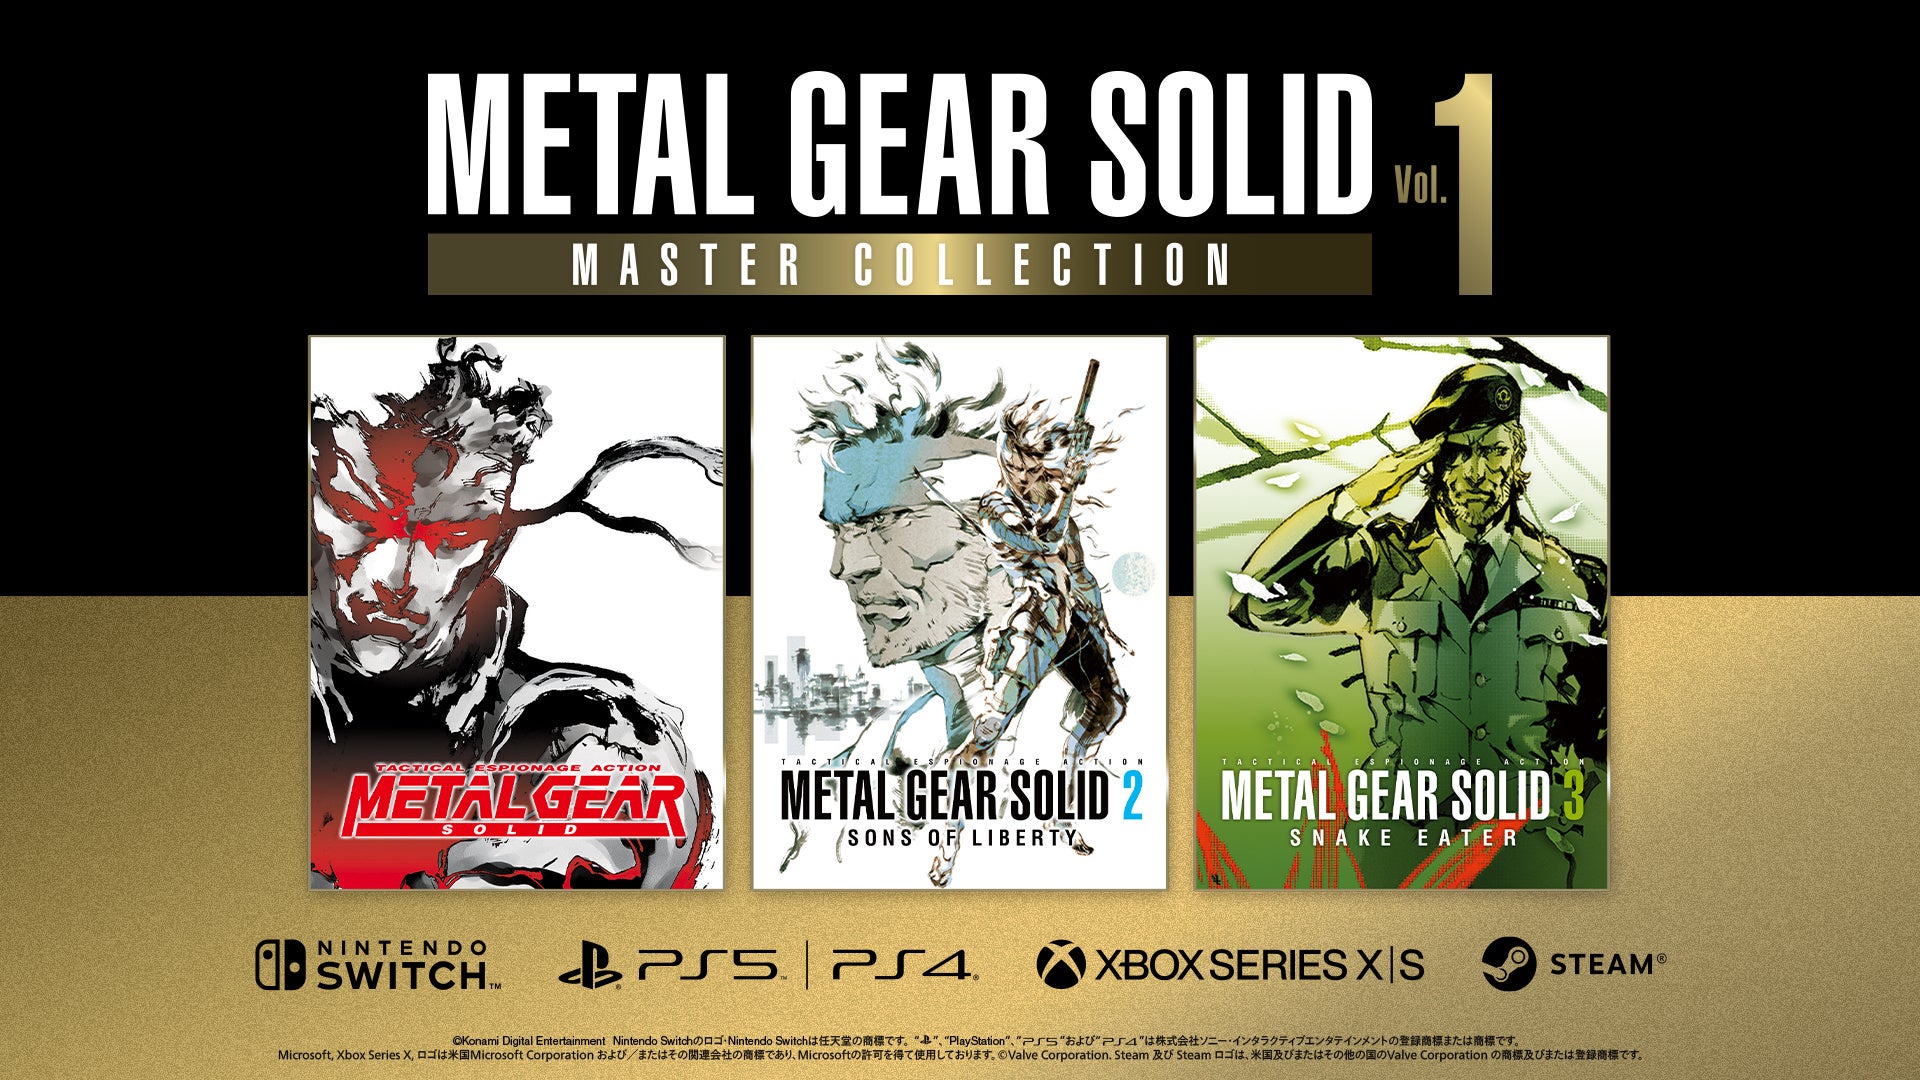 『METAL GEAR SOLID: MASTER COLLECTION Vol.1』本日発売！メタルギアシリーズの集大成が登場